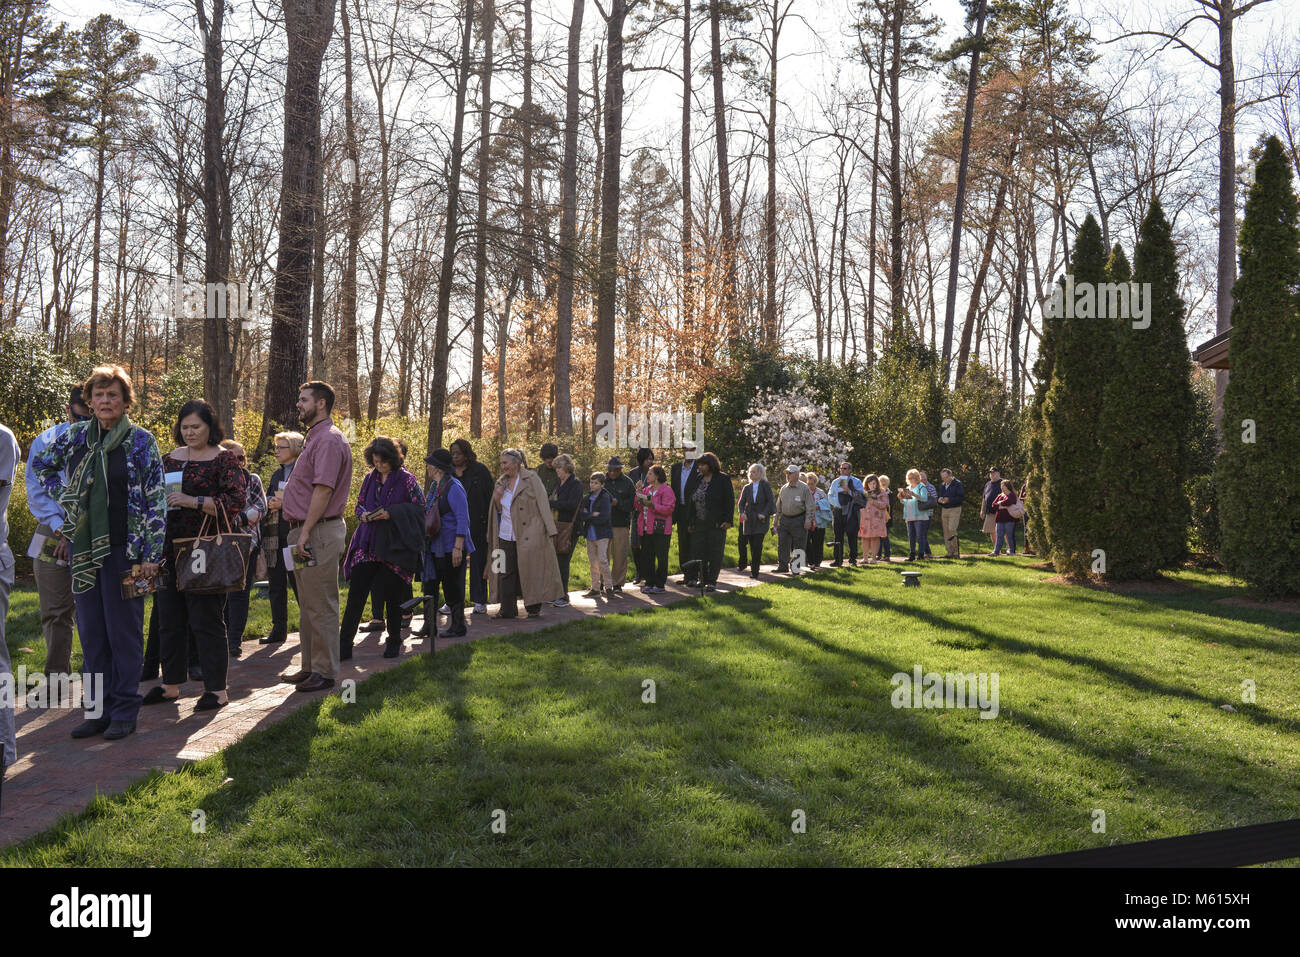 Charlotte, NC, USA. 27 Feb, 2018. Visitors line around the beautiful Billy Graham Library campus to pay their respects to the Reverend who died on 21 Feb 2018.  Rev. Graham's funeral will occur on Friday  followed by a gravesite service. He will be buried beside his wife Ruth in the Prayer Garden at the Billy Graham Library in Charlotte. Credit: Castle Light Images / Alamy Live News. Stock Photo